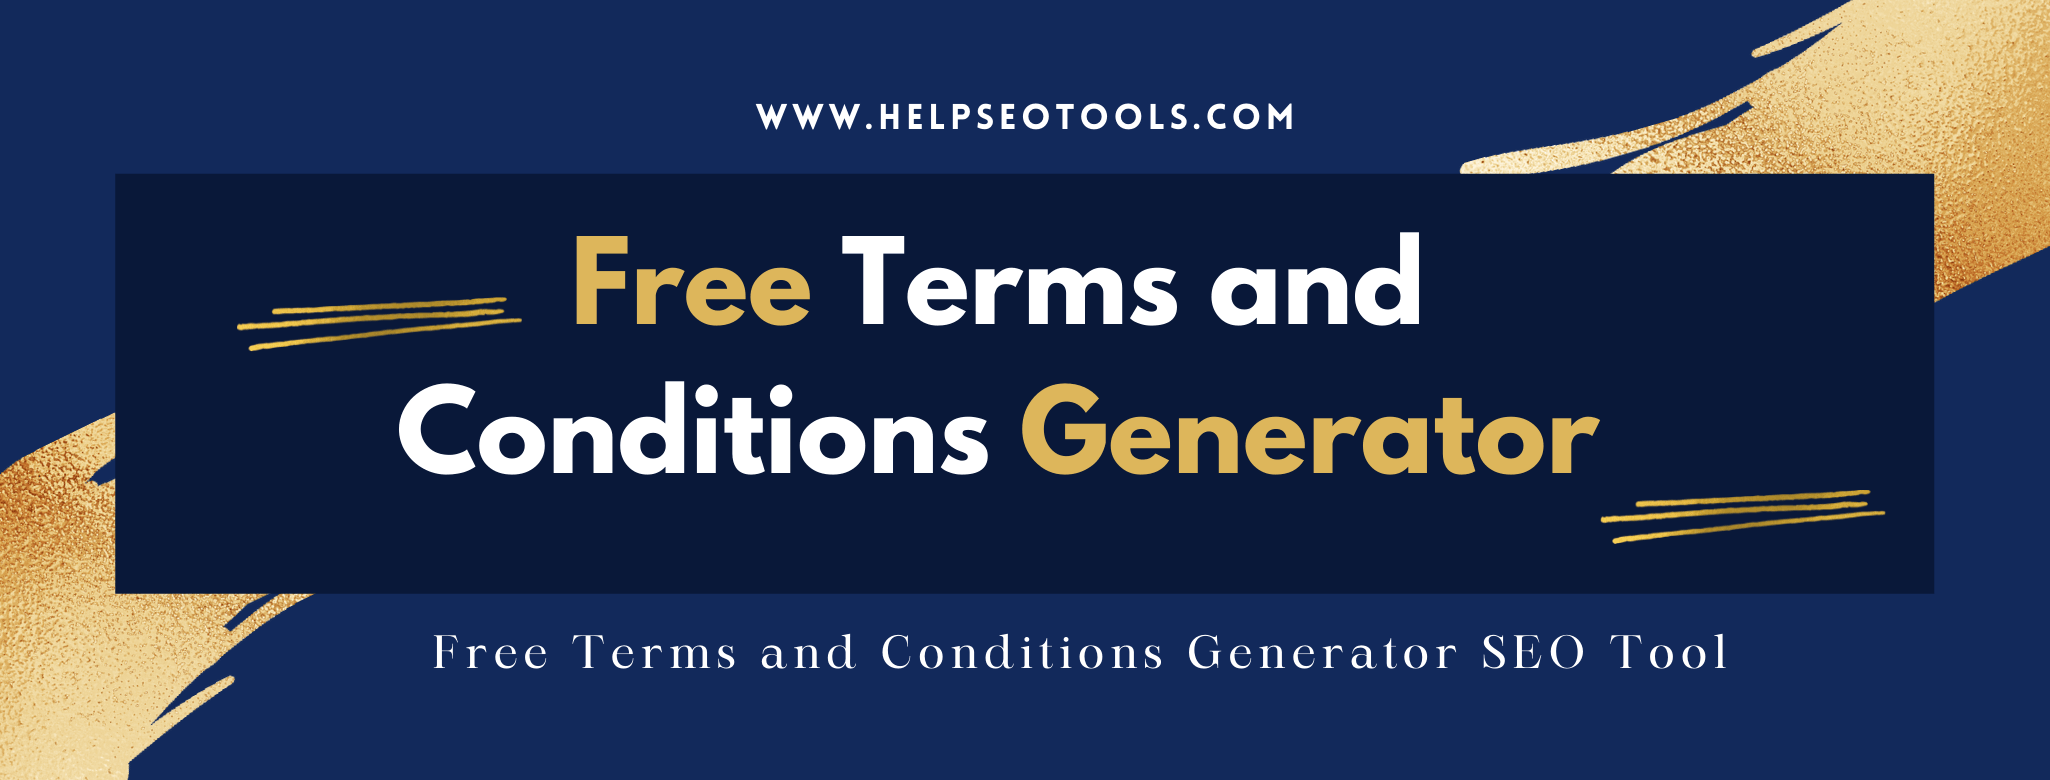 Terms and Conditions Generator Free